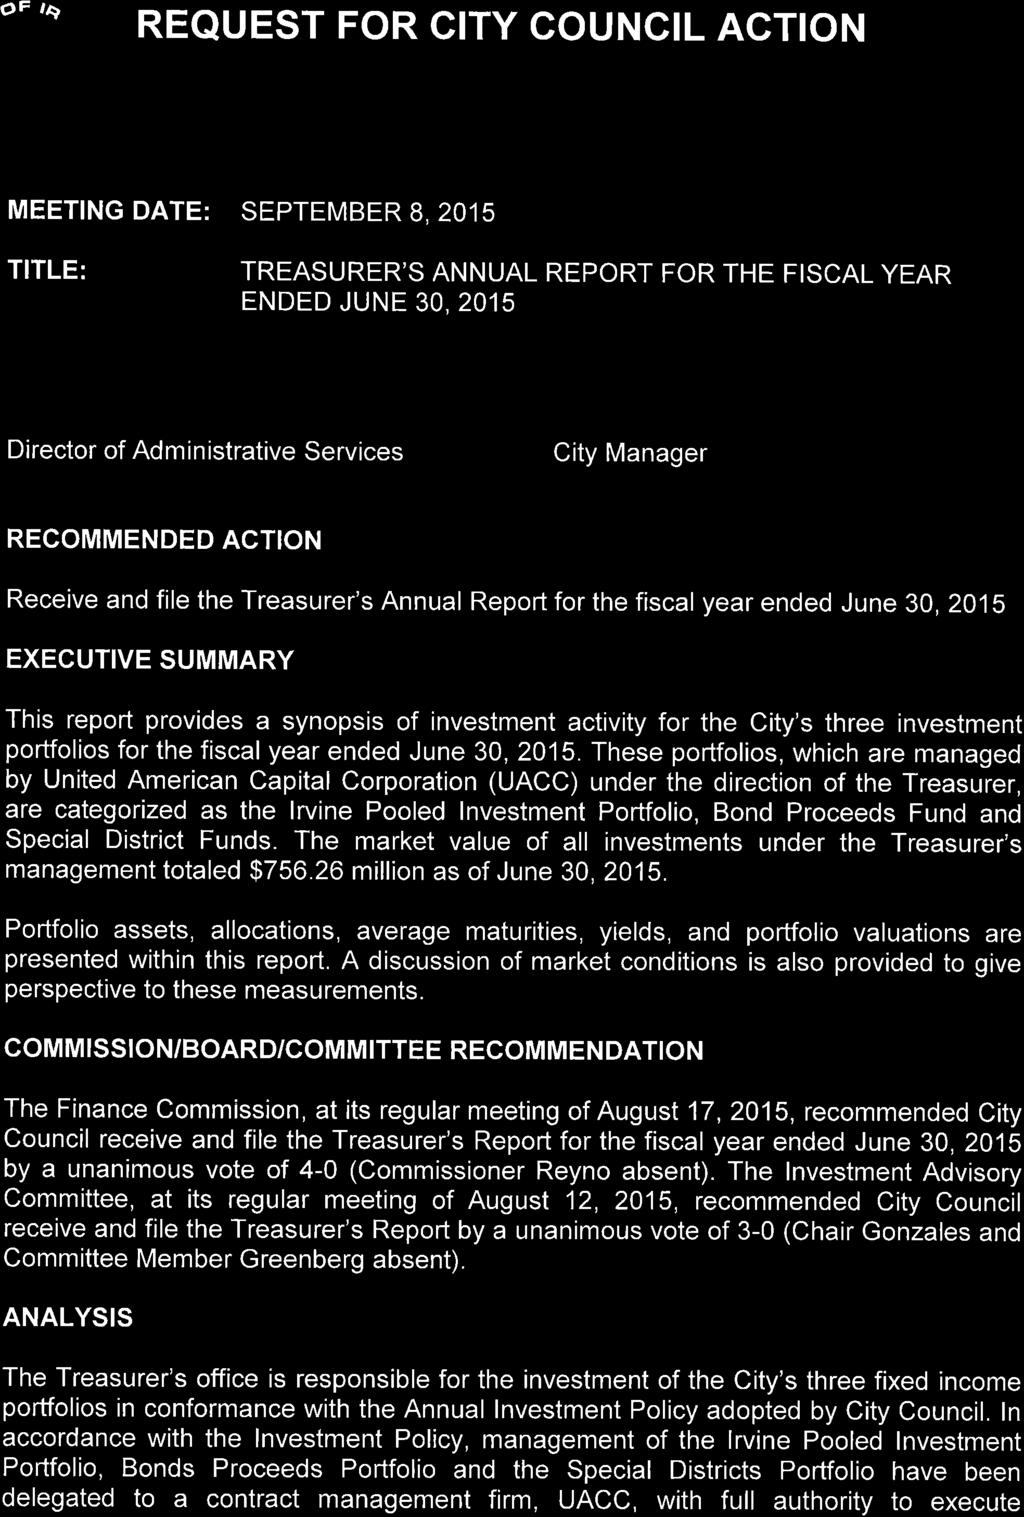 REQUEST FOR CITY COUNCIL ACTION MEETING DATE: SEPTEMBER 8, 2015 TITLE: TREASURER'S ANNUAL REPORT FOR THE FISCAL YEAR ENDED JUNE 30, 2015 Director of Administrative Services Cit~~ RECOMMENDED ACTION